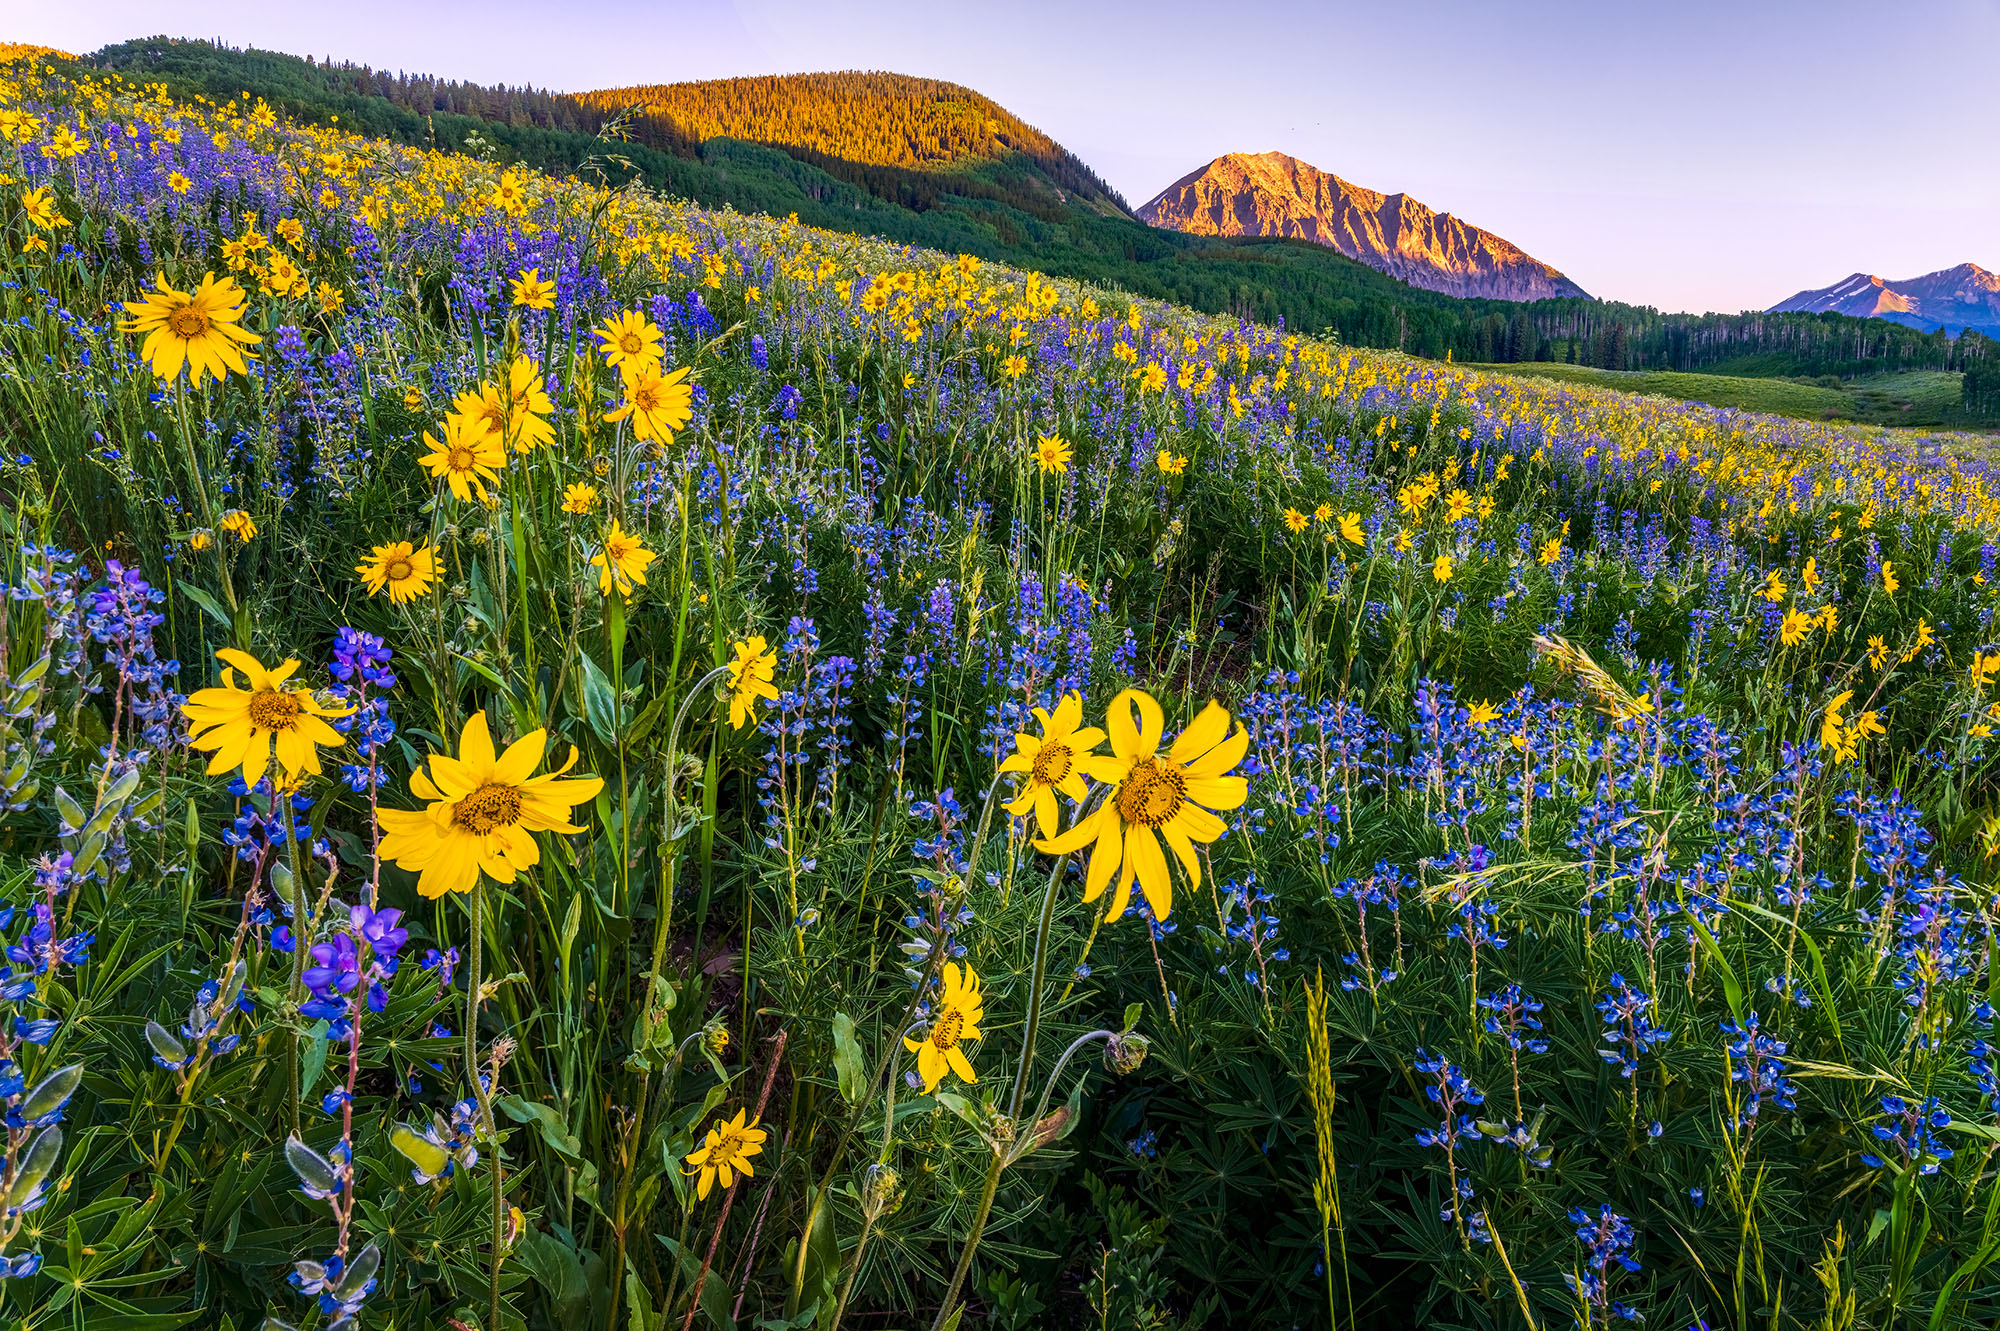 In the heart of Crested Butte, I encountered a breathtaking sight - a vast field adorned with golden sunflowers and vibrant purple...